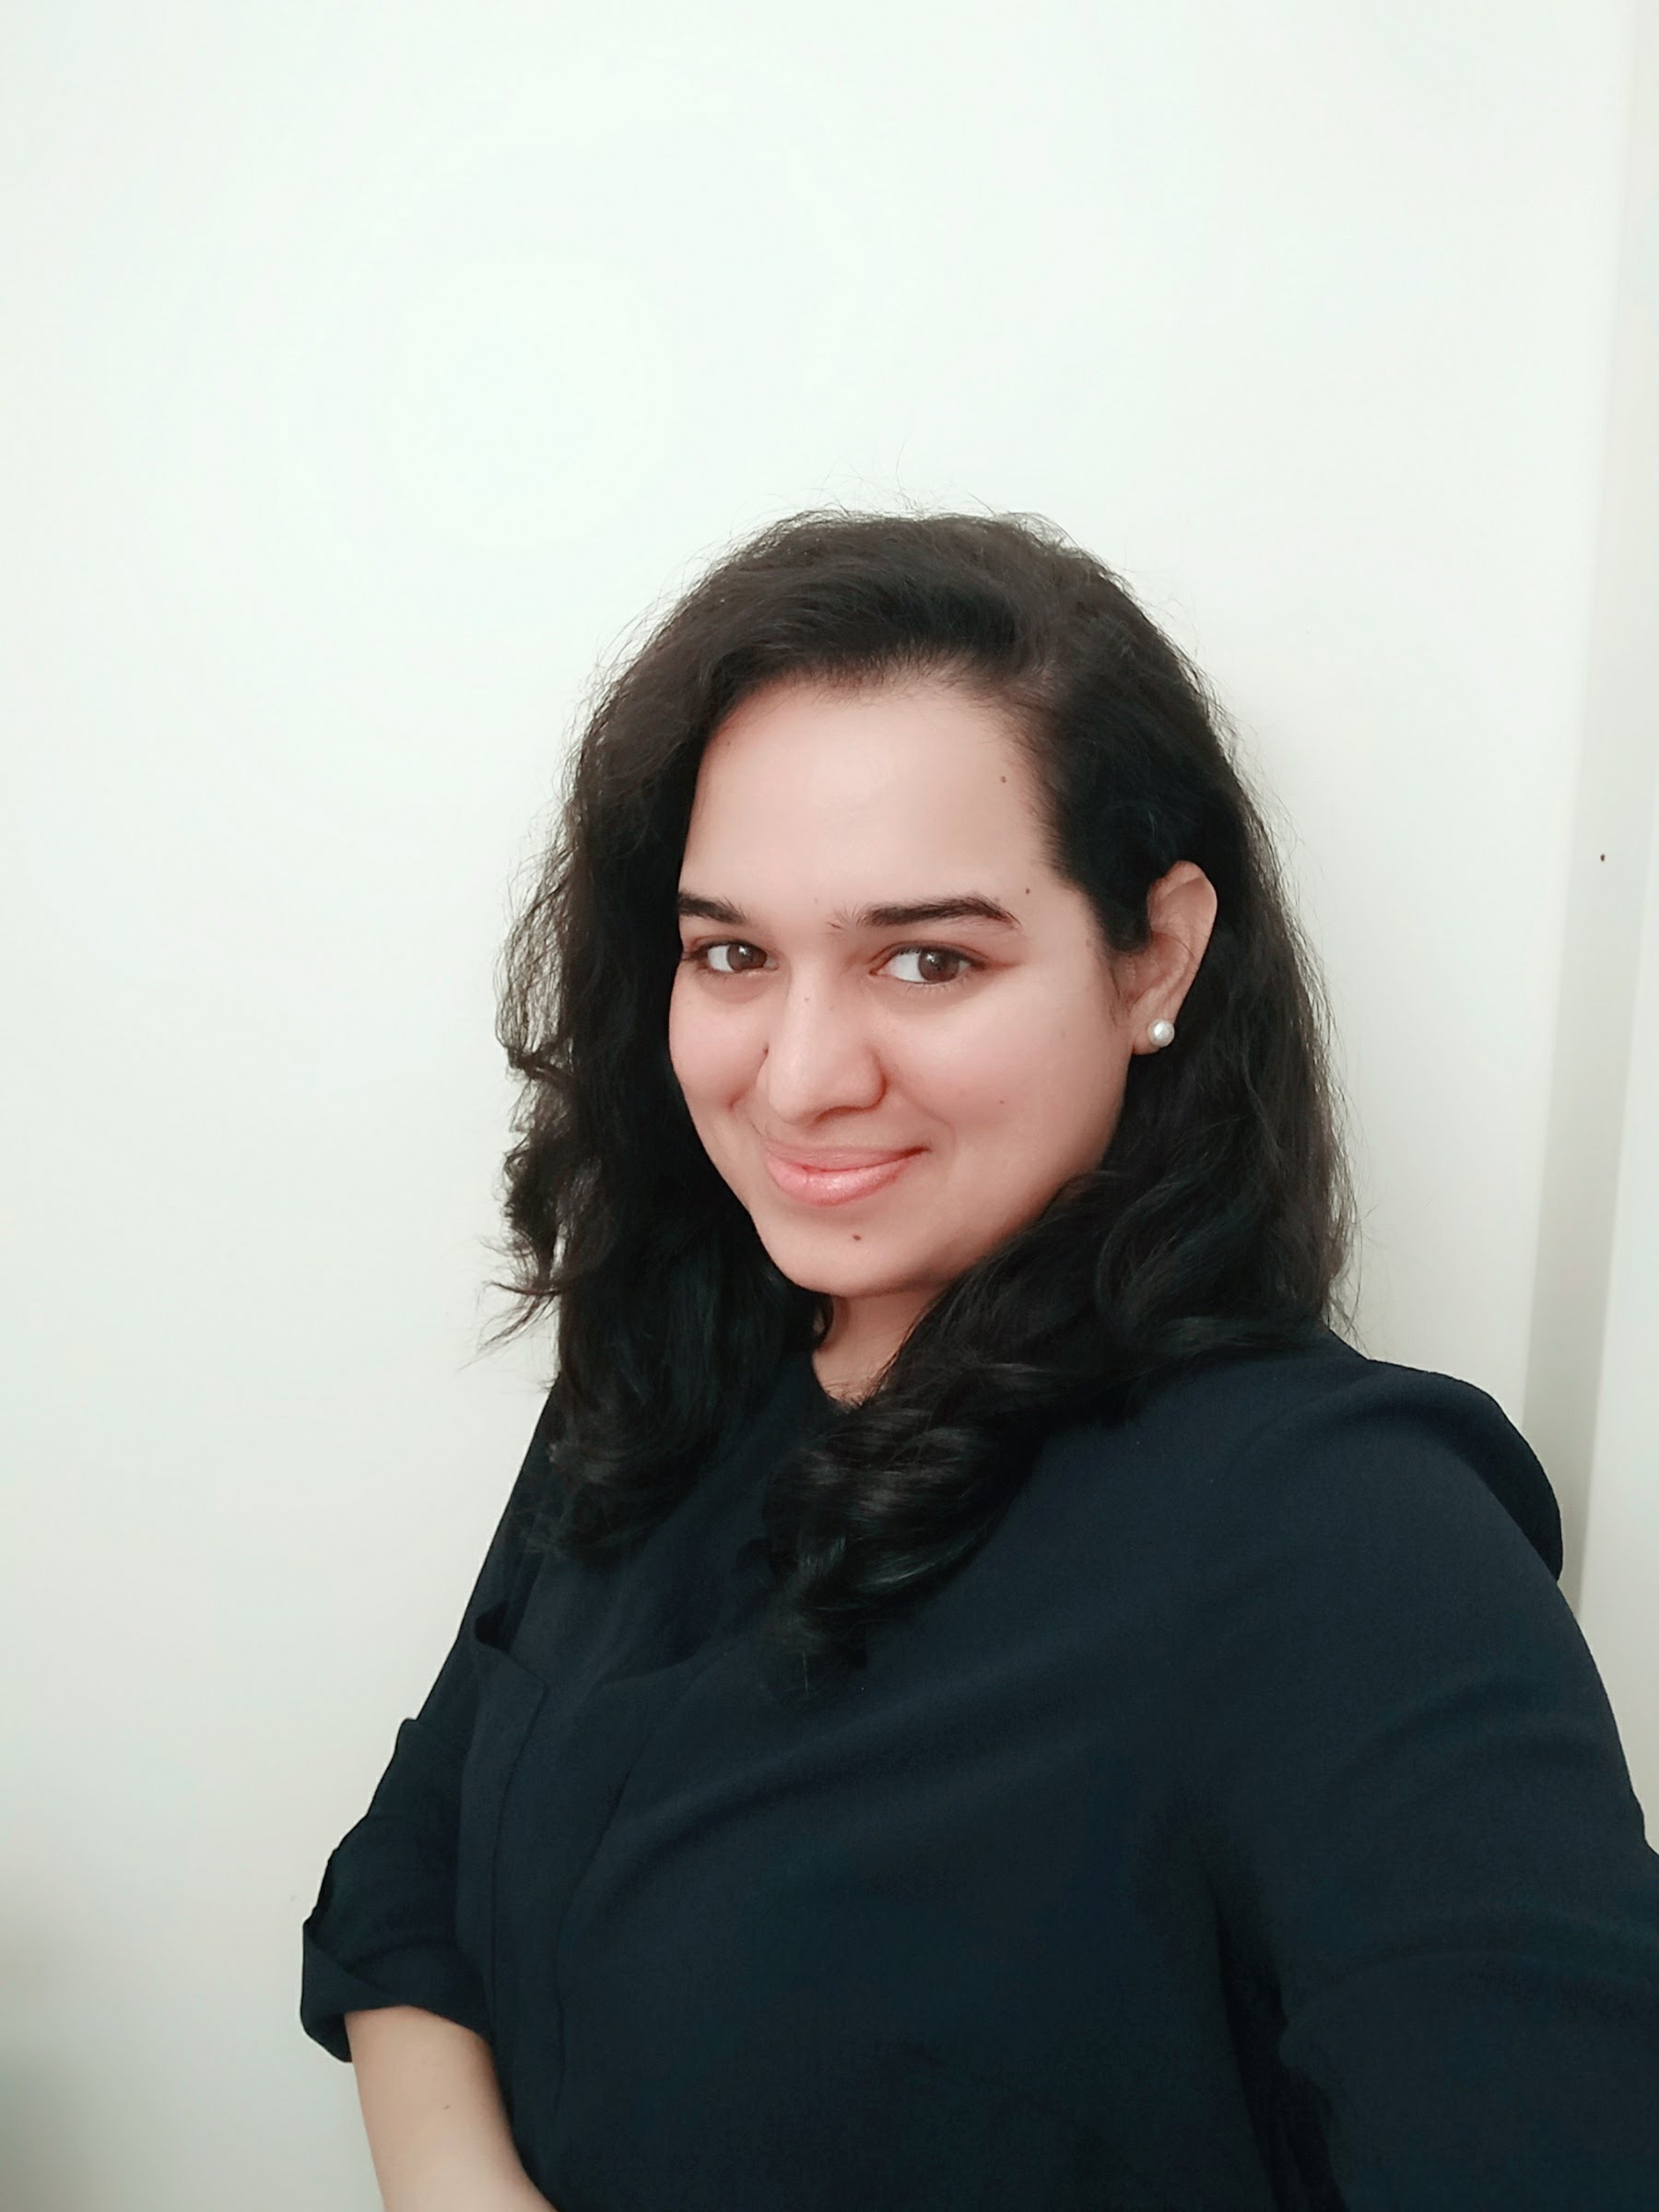 Roshni Shaikh marketing tips from amazing copywriter,copywriting, copywriter, marketing, blog, writer, writing, 
content writing, creative strategist,creative writer, book, review, fictitious story, witmaze, 
Chitra Thapa, CT